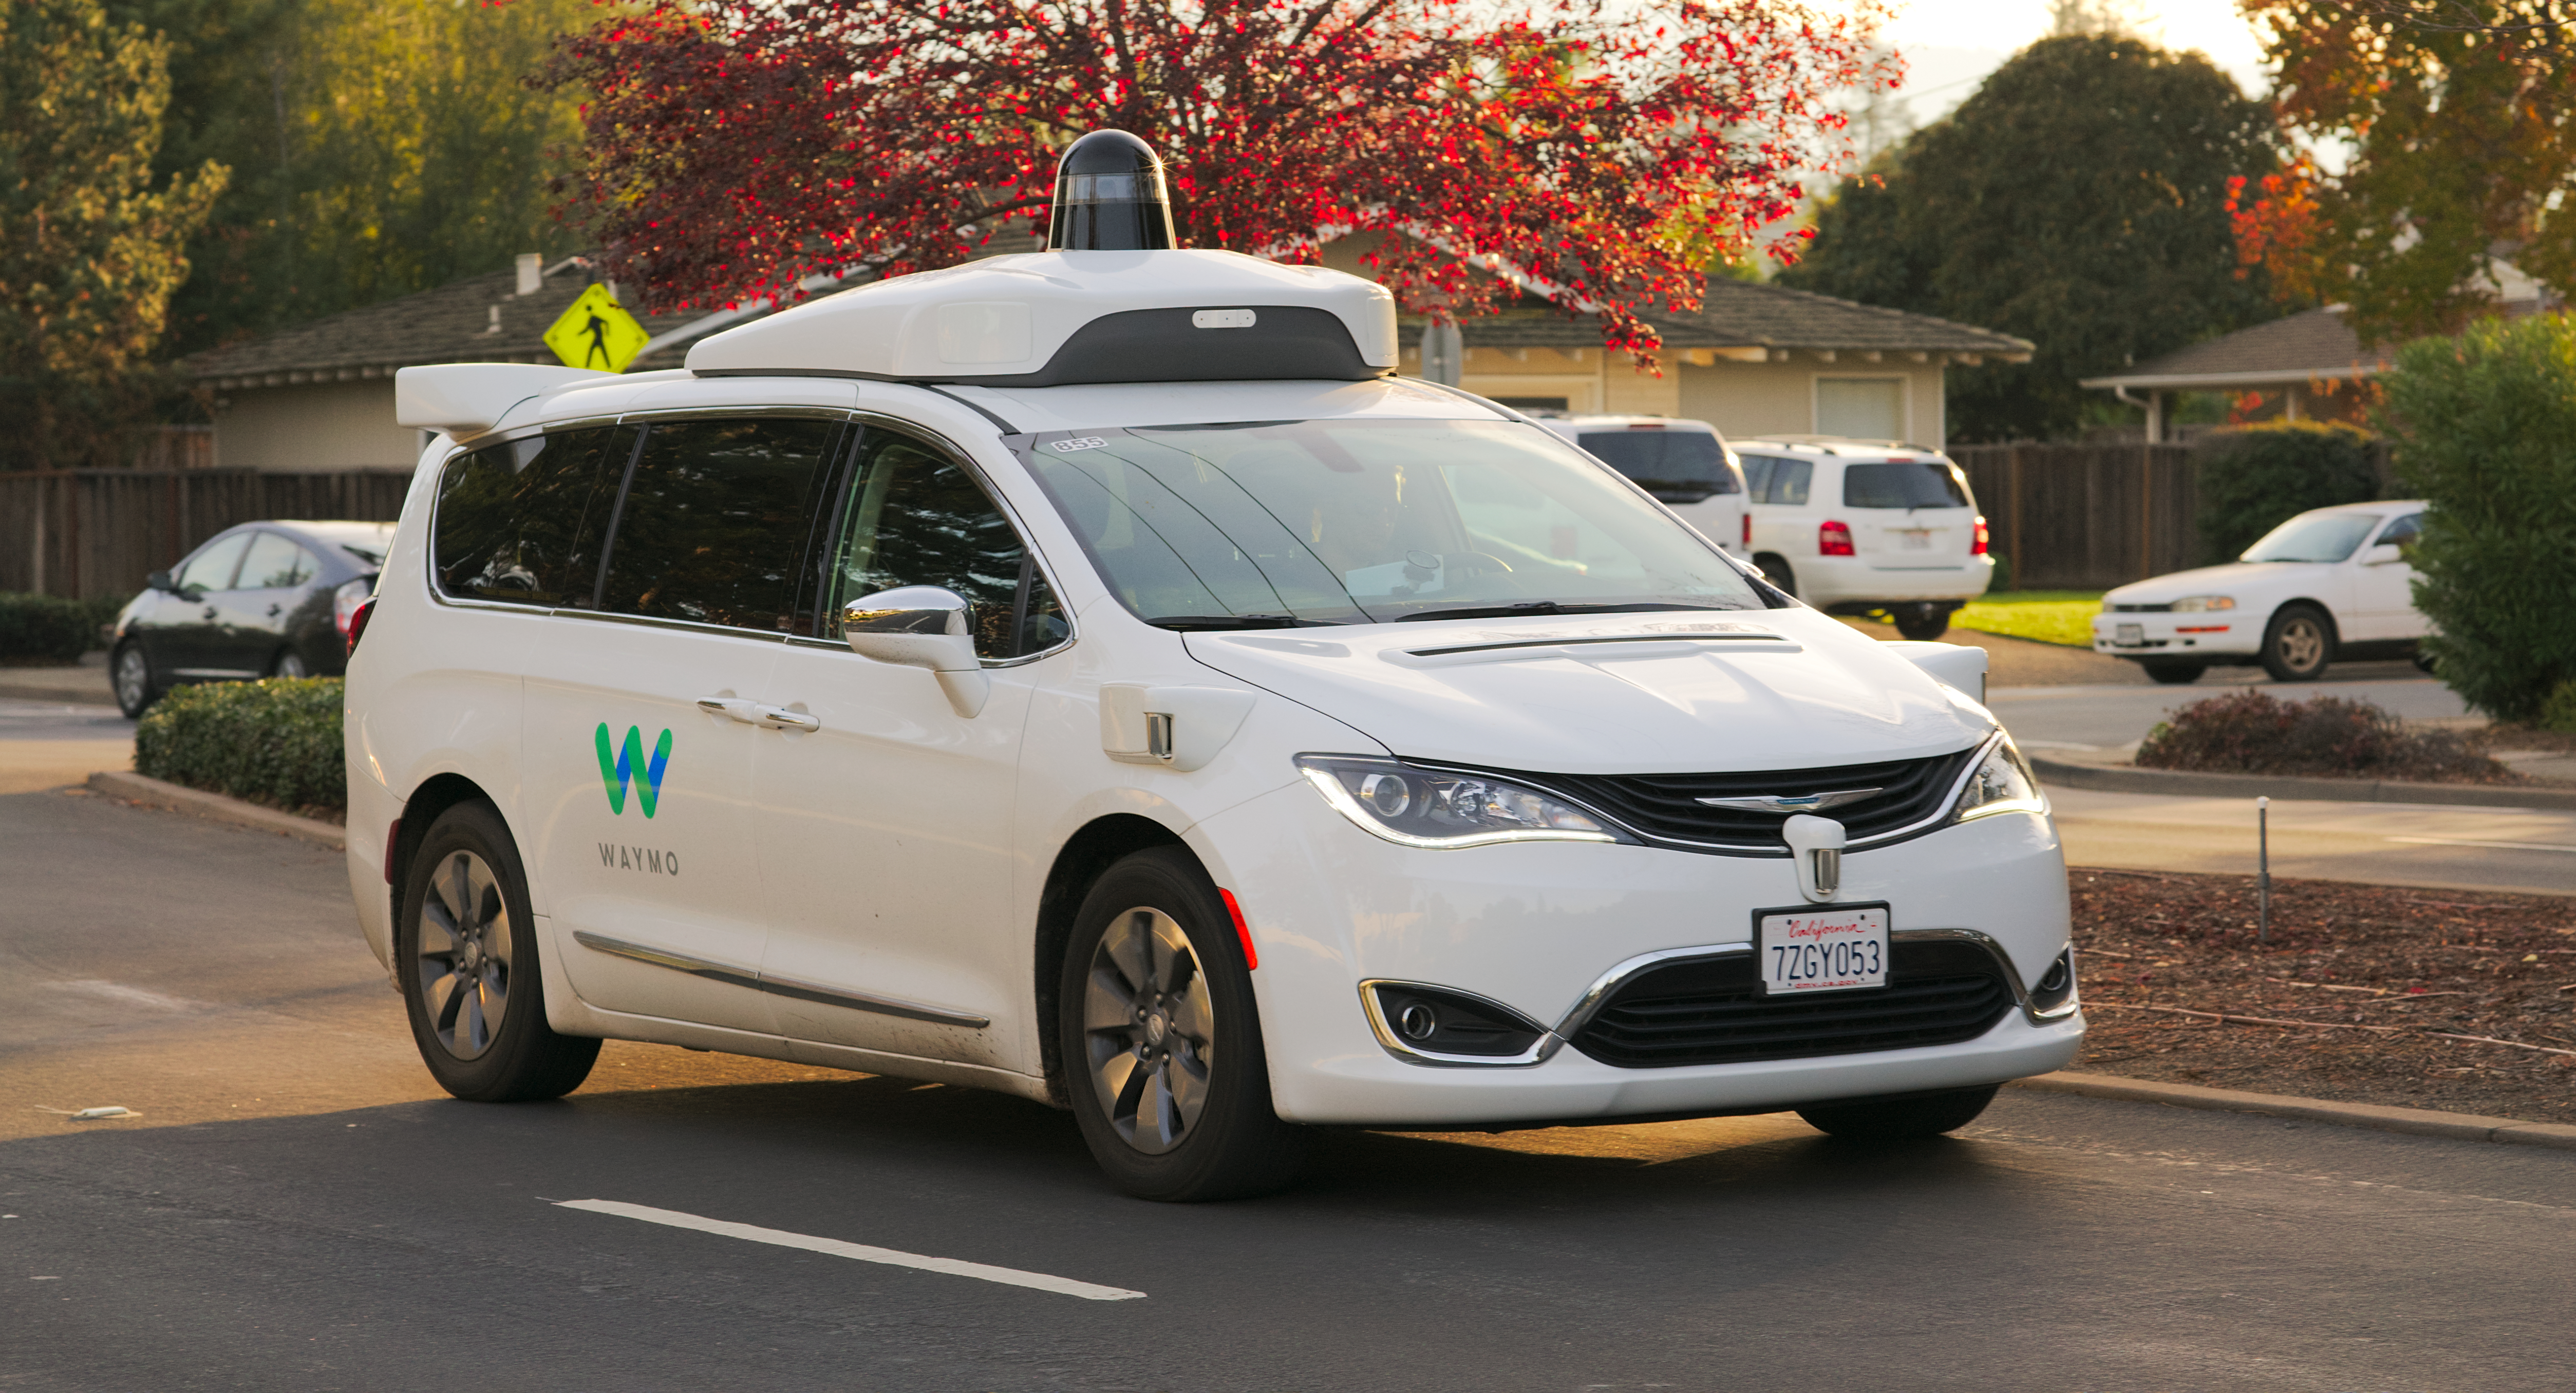 This is a modern Waymo self-driving vehicle.